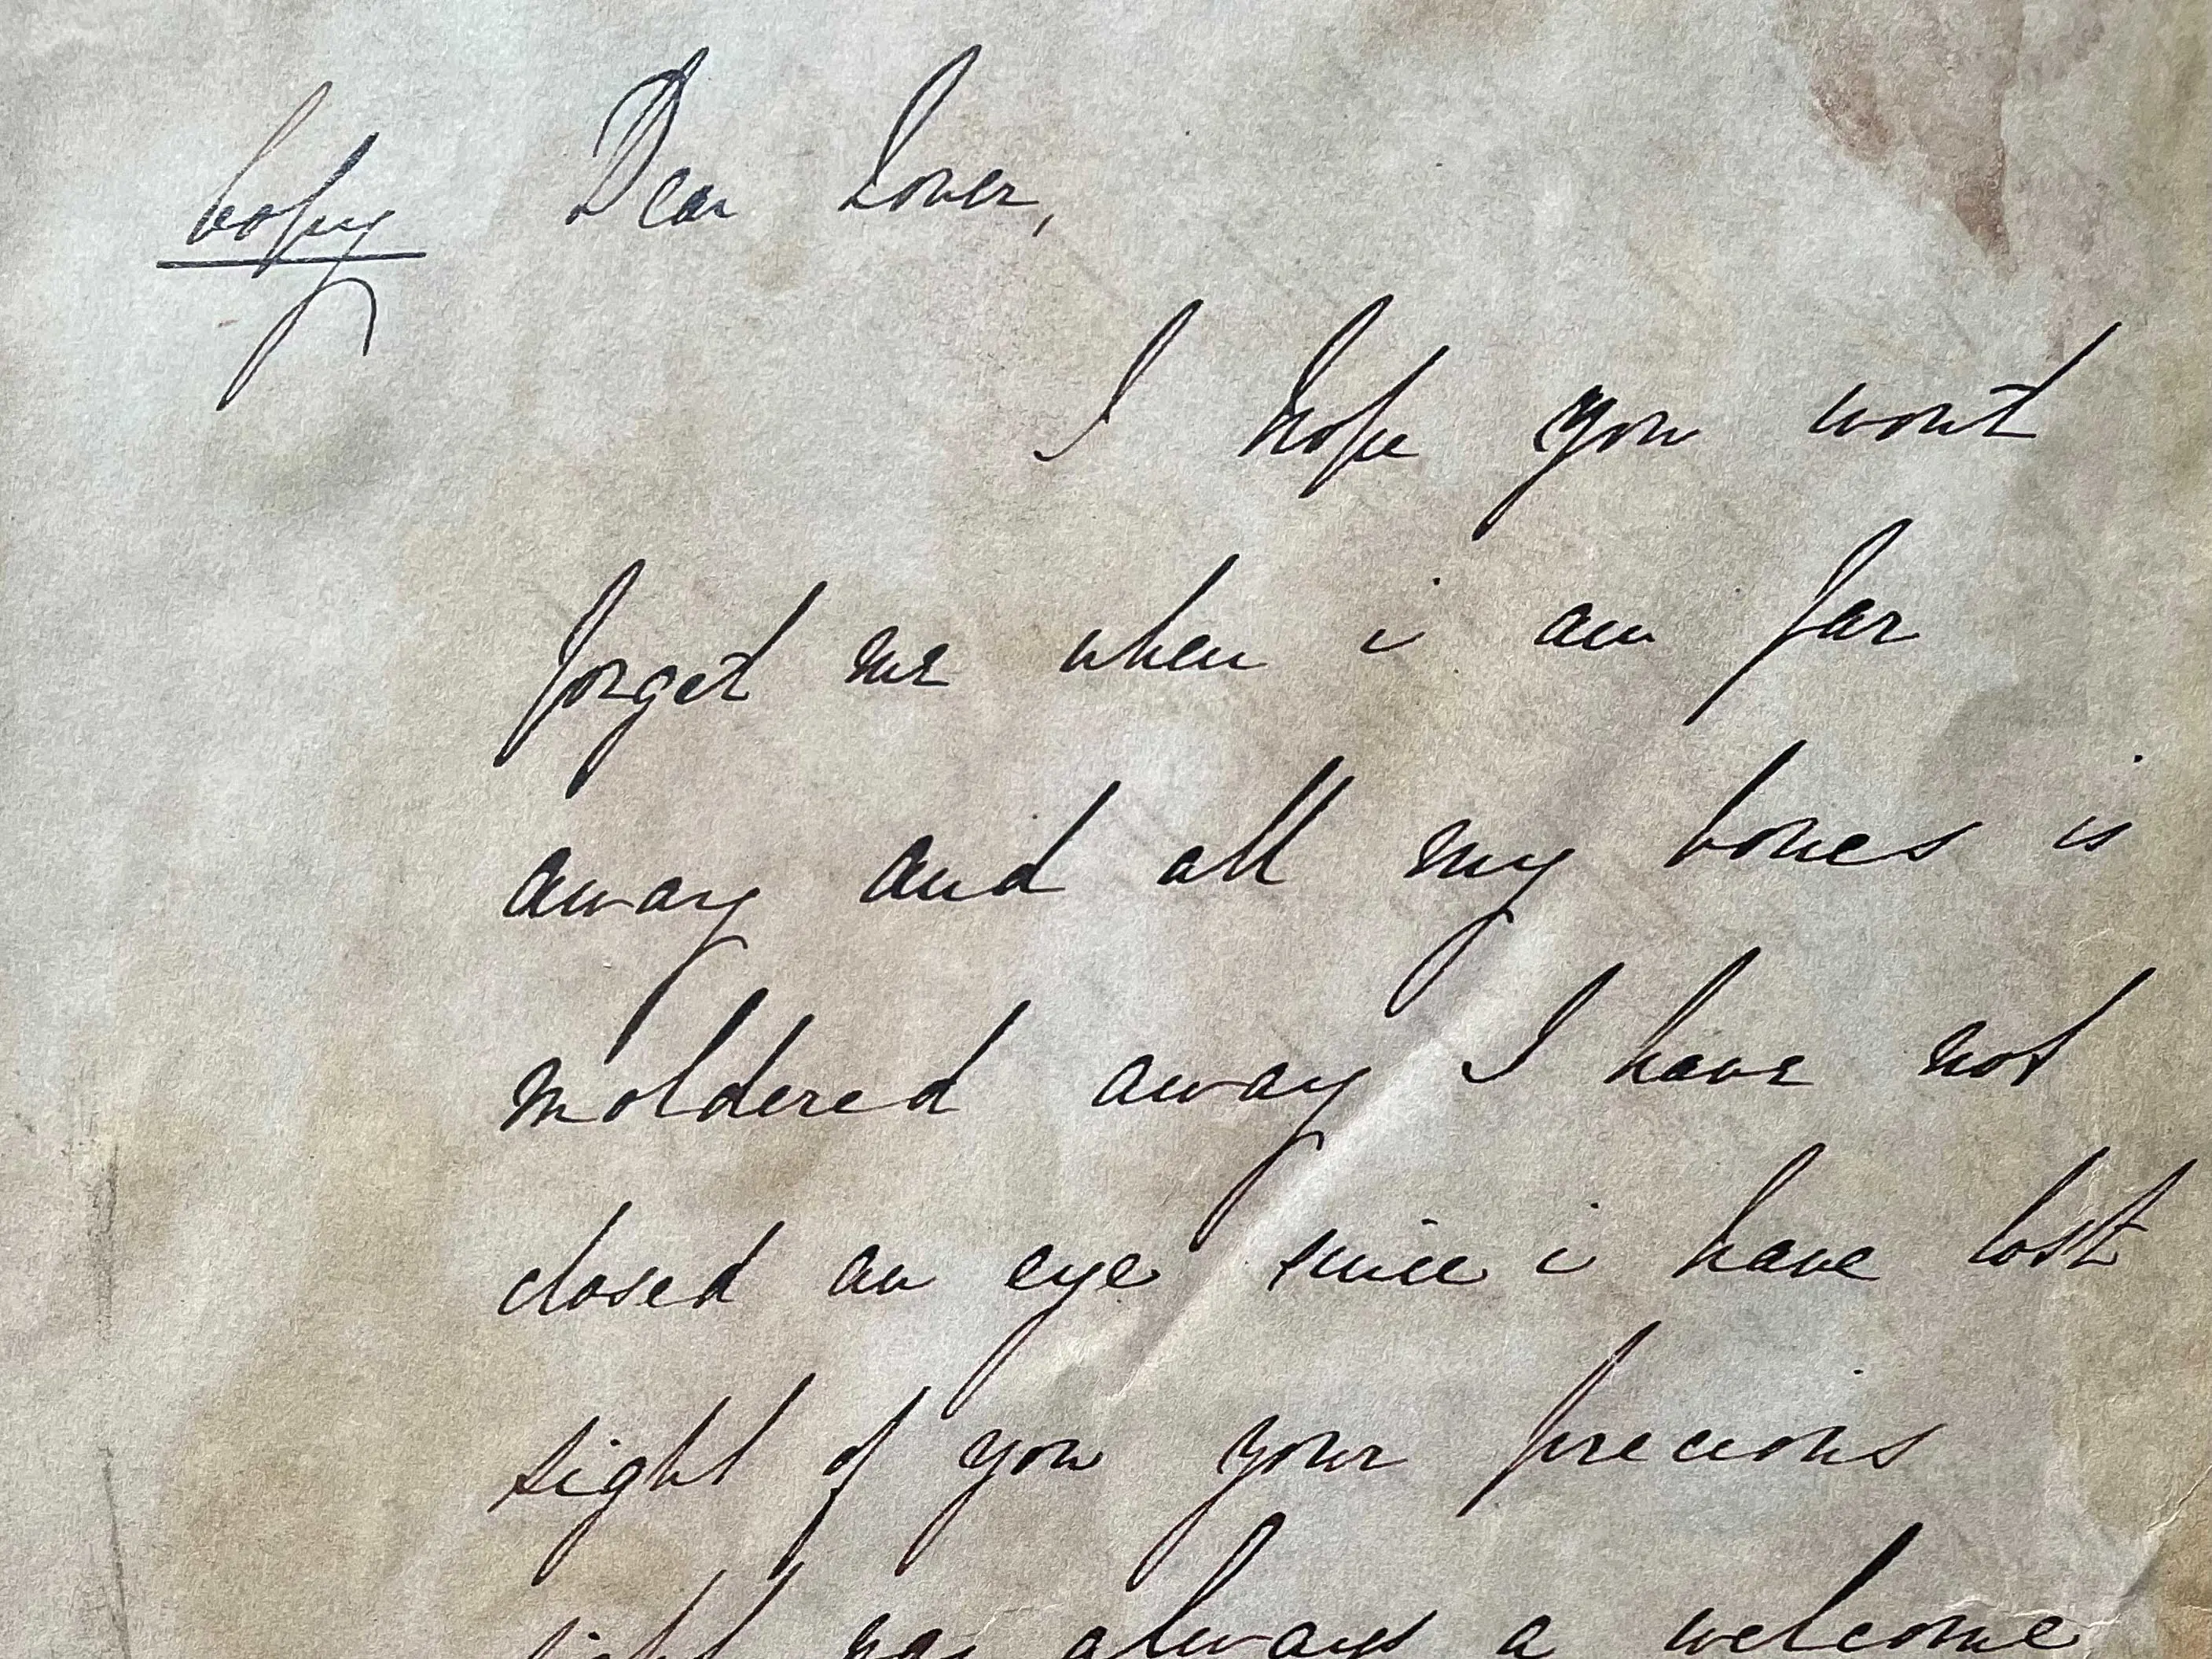 A hand-written letter from Dennis Prendergasts to his male lover